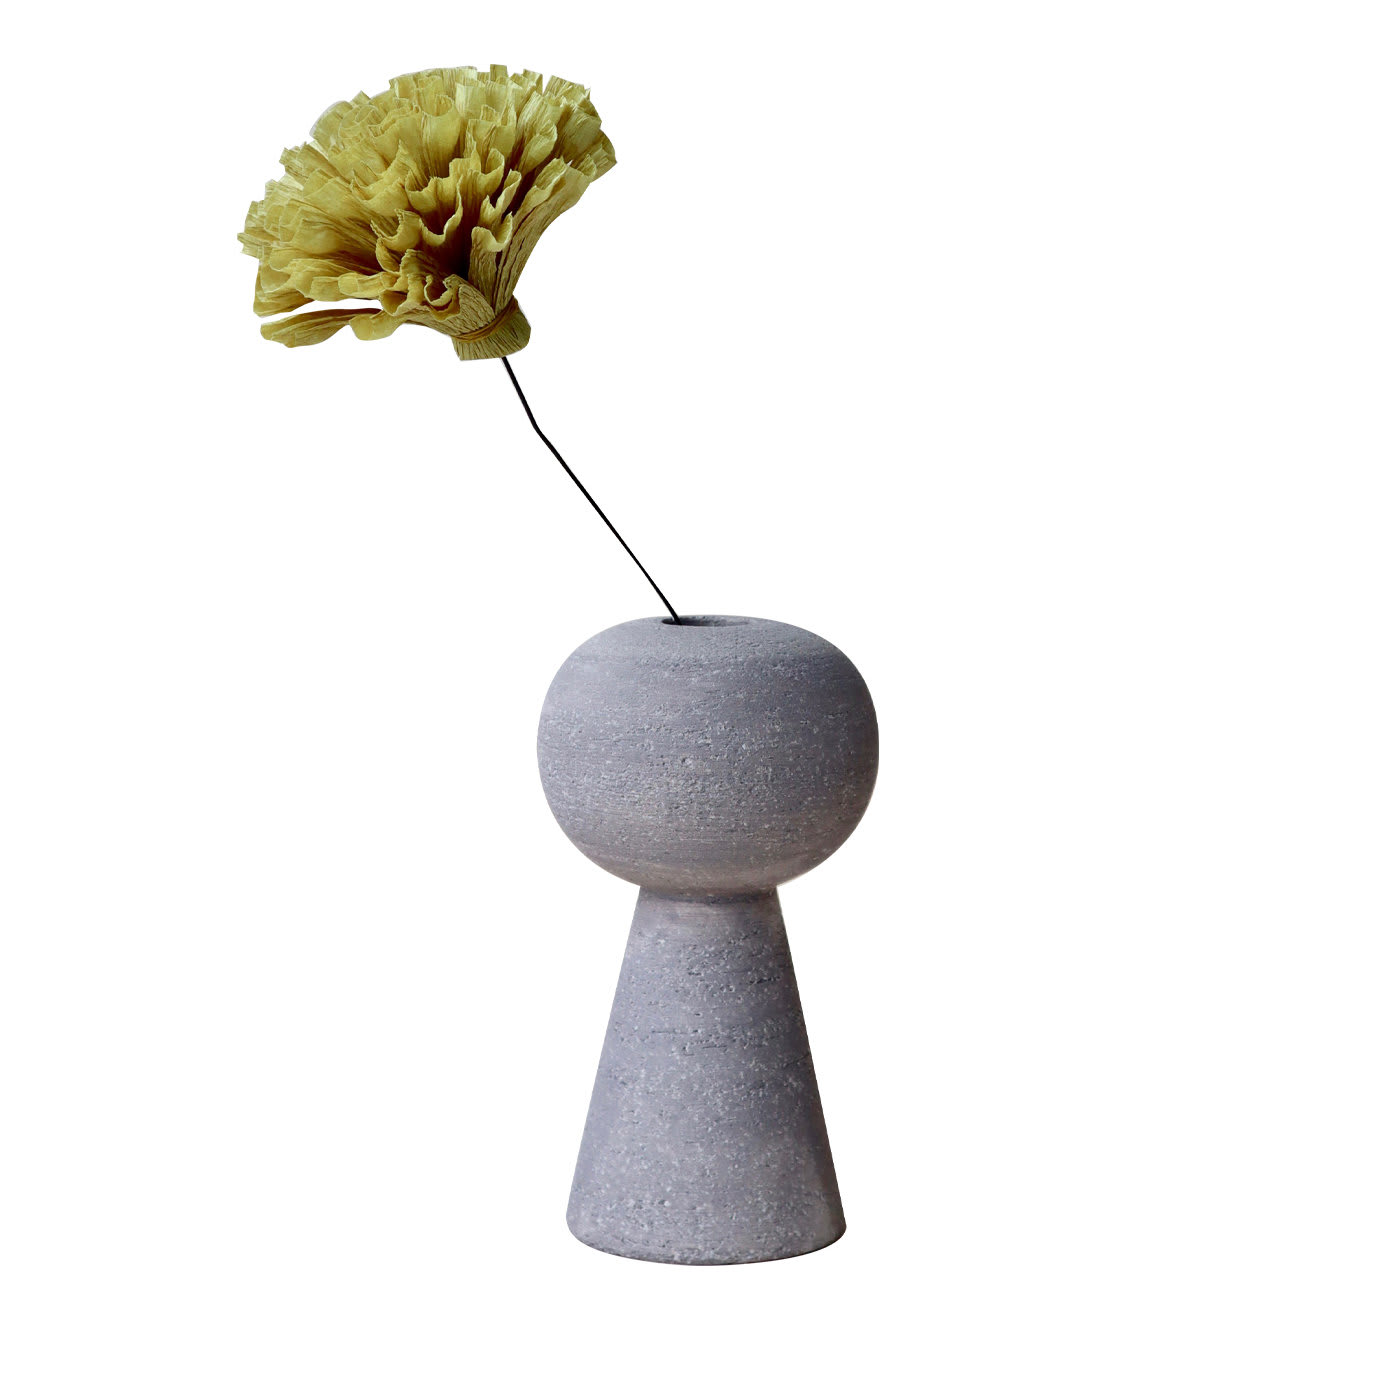 Better Together Paco Terracotta Vase and Crepe Paper Flower - Federica Bubani